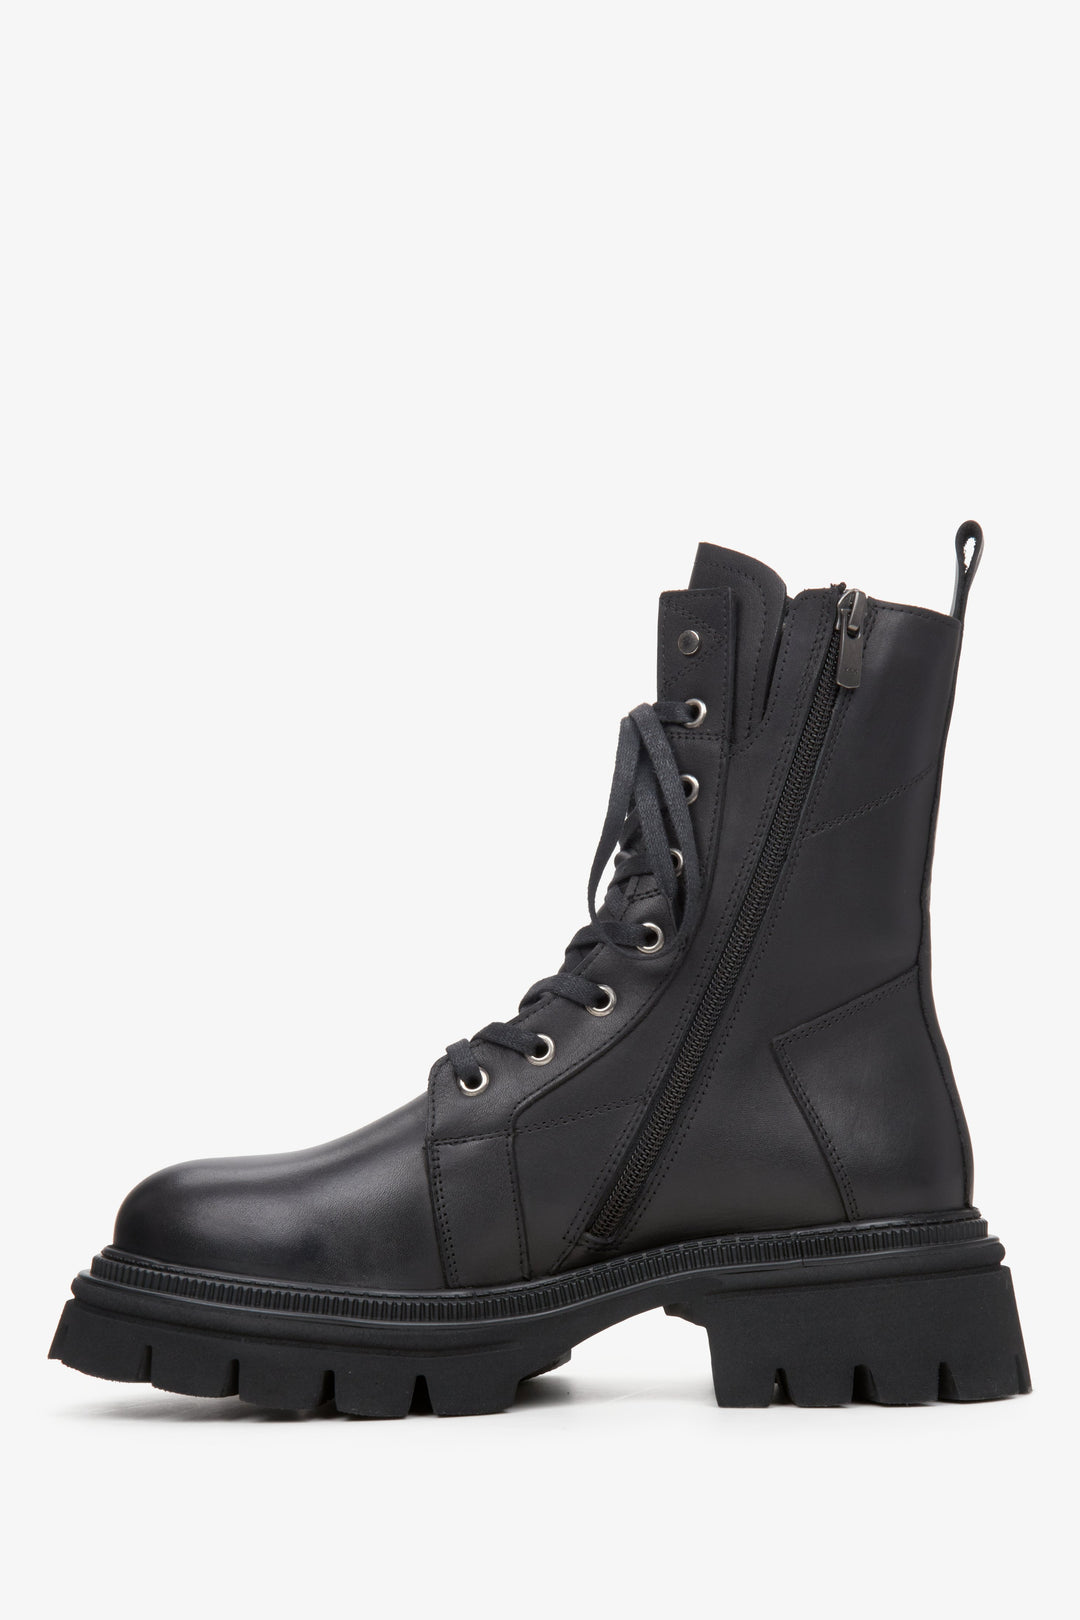 Women's black elevated boots in genuine leather by Estro - shoe profile.